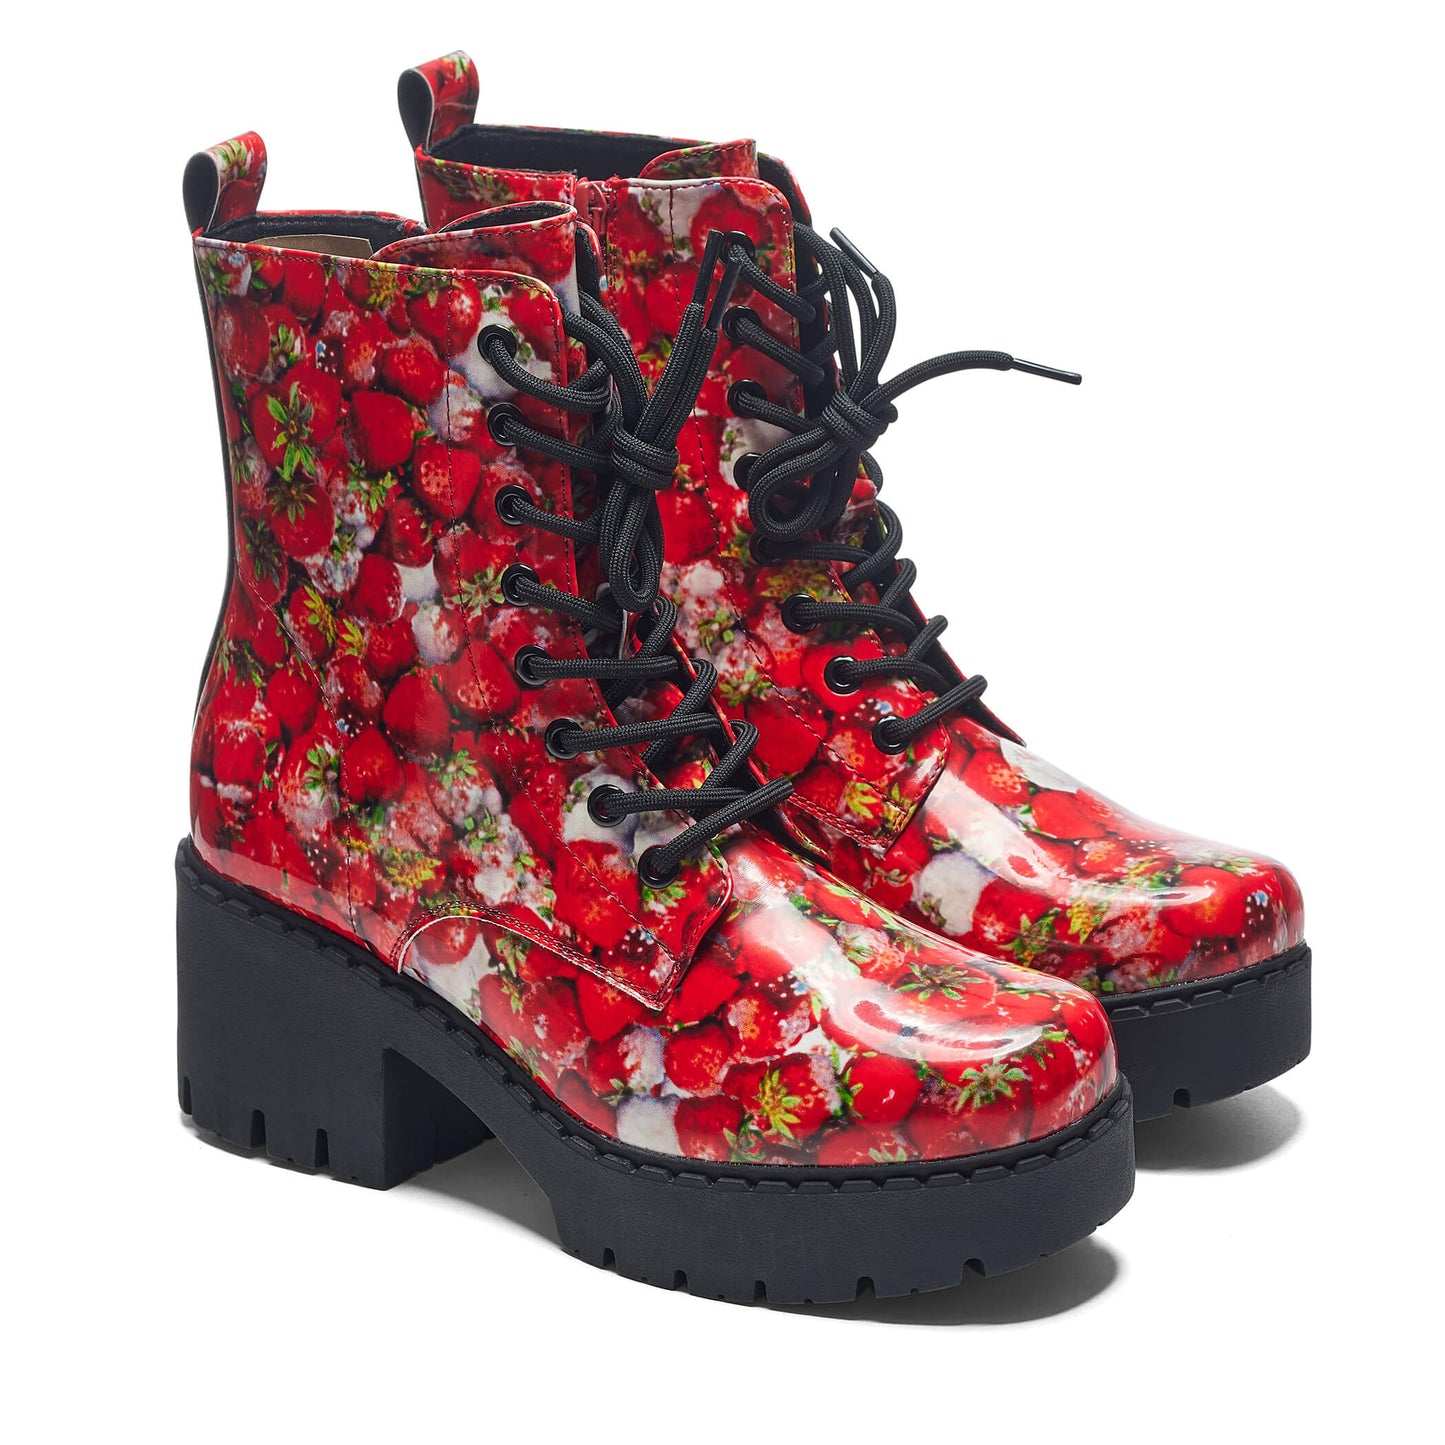 Frozen Strawberries Switch Boots - Ankle Boots - KOI Footwear - Red - Three-Quarter View